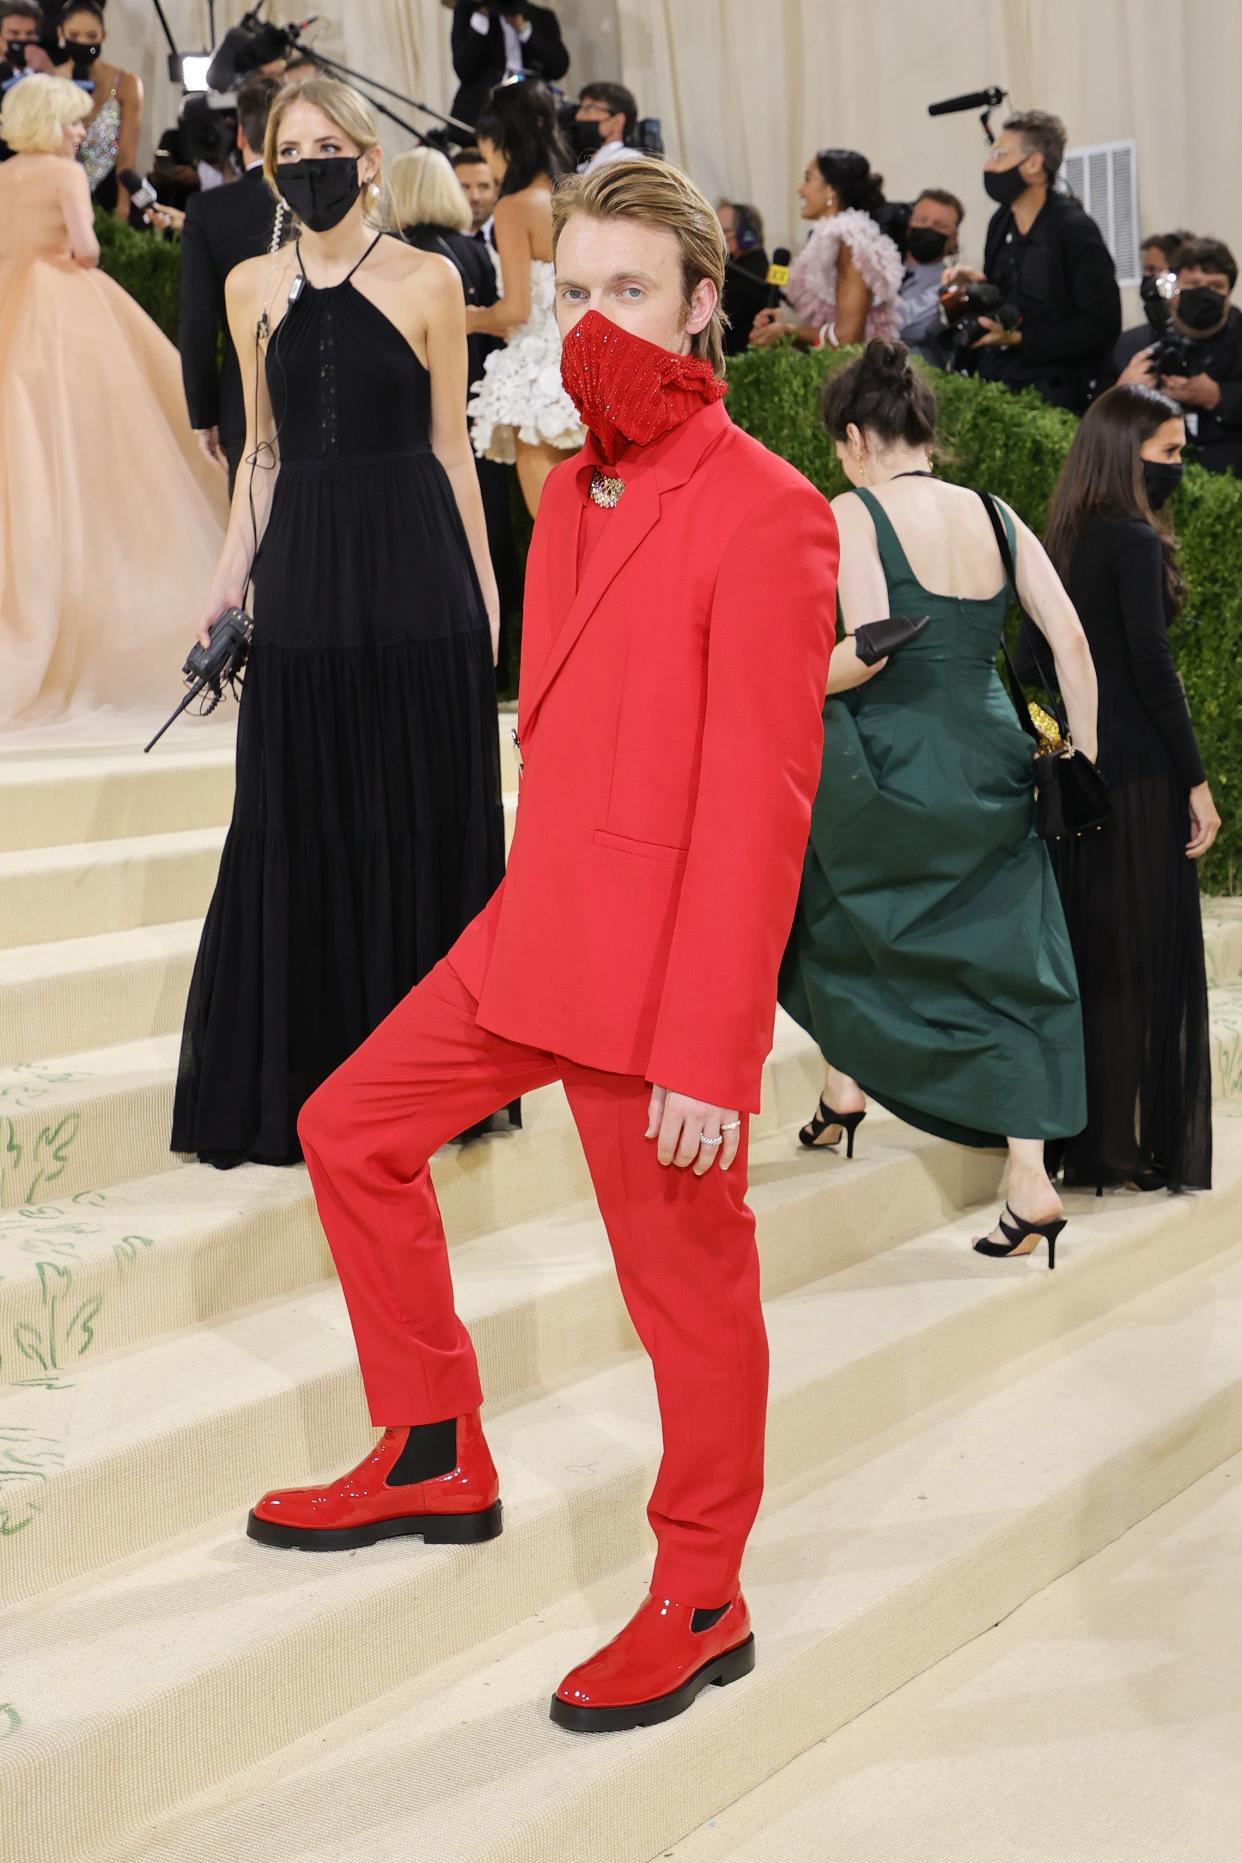 Finneas attends The 2021 Met Gala Celebrating In America: A Lexicon Of Fashion at Metropolitan Museum of Art on Sept. 13, 2021 in New York.